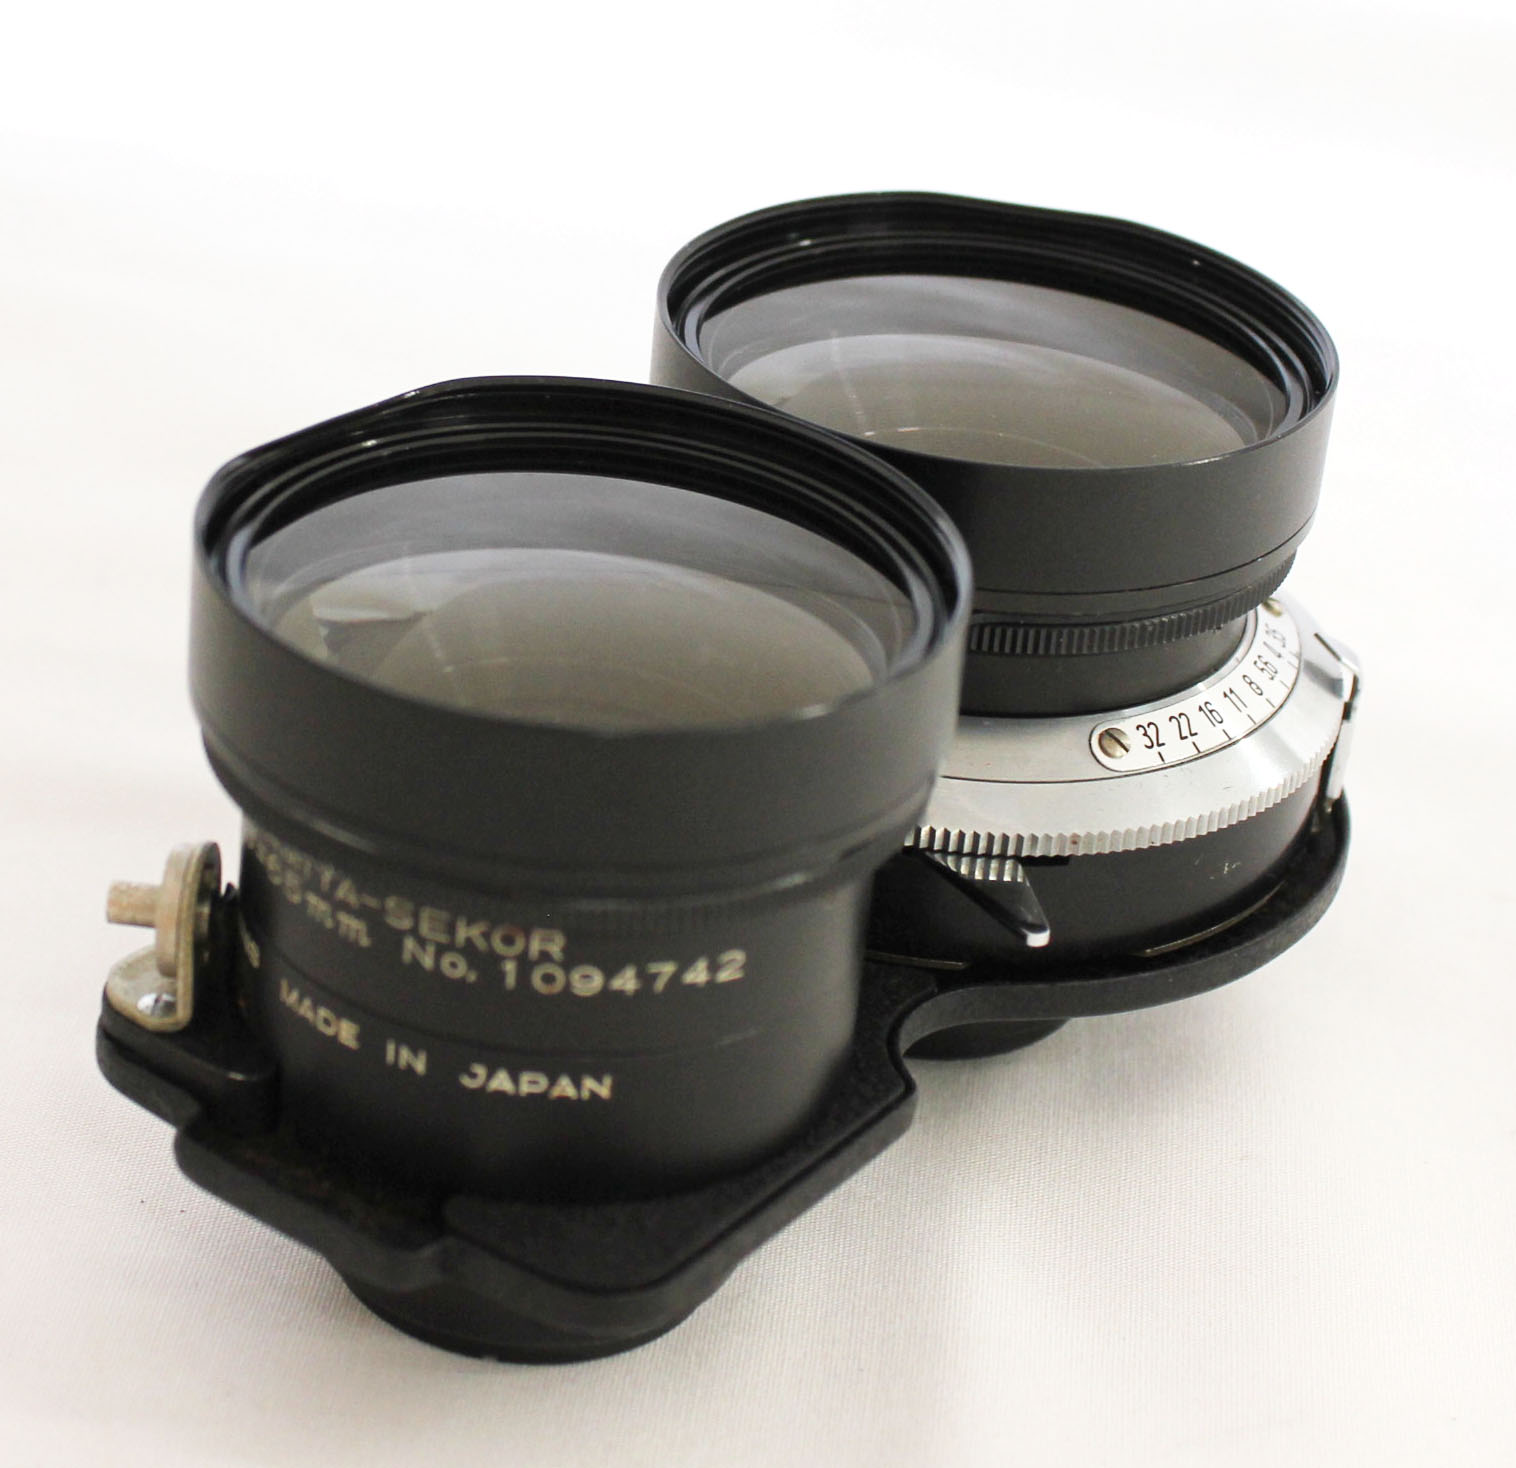 Mamiya Sekor 65mm F/3.5 TLR Lens for C3 C33 C220 C330 from Japan Photo 5